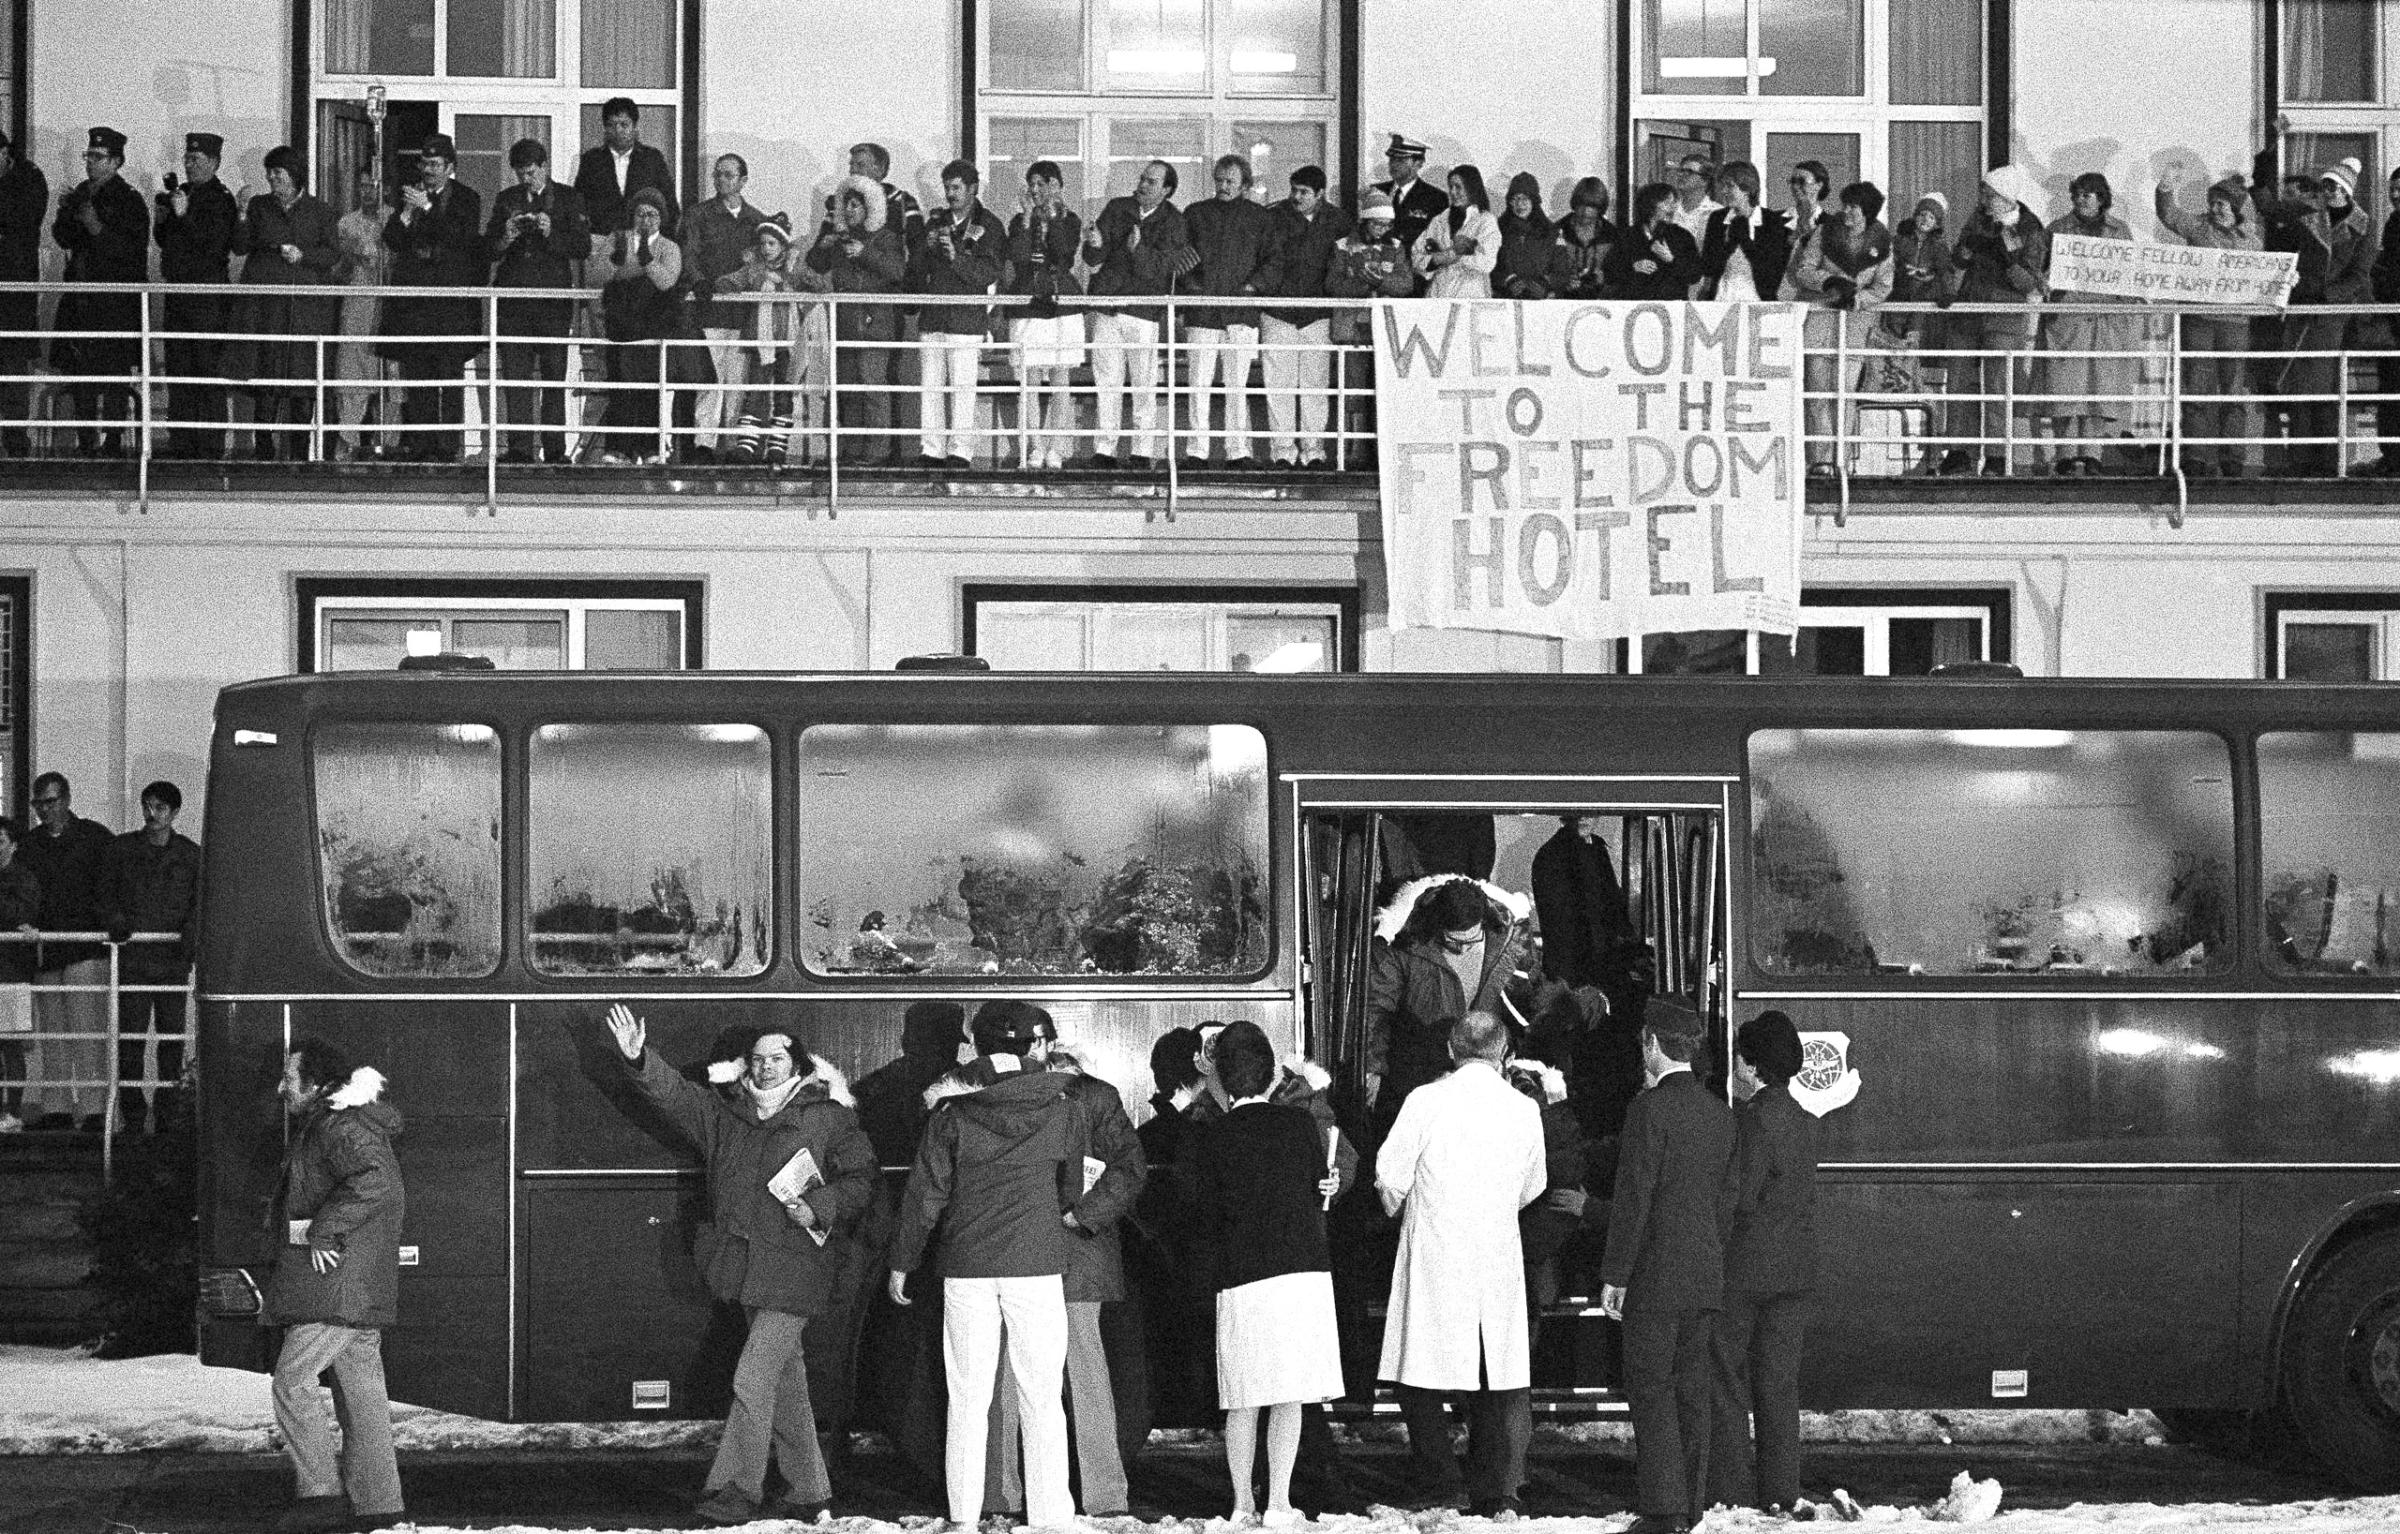 A crowd of well-wishers on the balconies of the Wiesbaden U.S. Air Force hospital greets the 52 Americans released by the Iranian government, January 21, 1981, after being held hostage for 444 days. A sign displayed by a group of people reads, "Welcome to the Freedom Hotel."